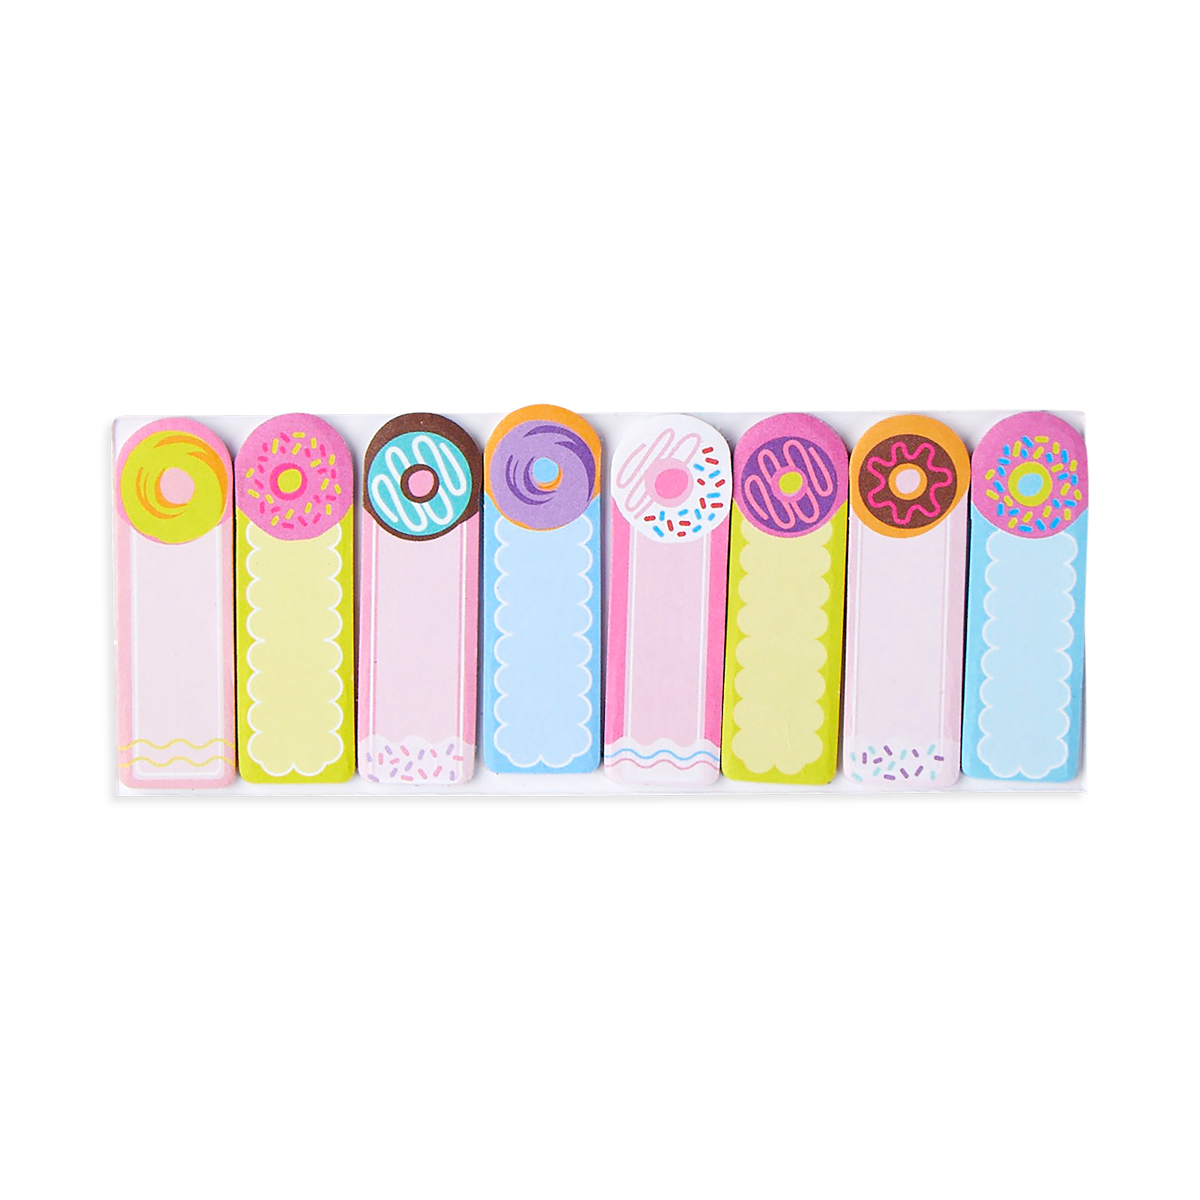 OOLY Note Pals Sticky Tabs - Dainty Donuts view of all styles